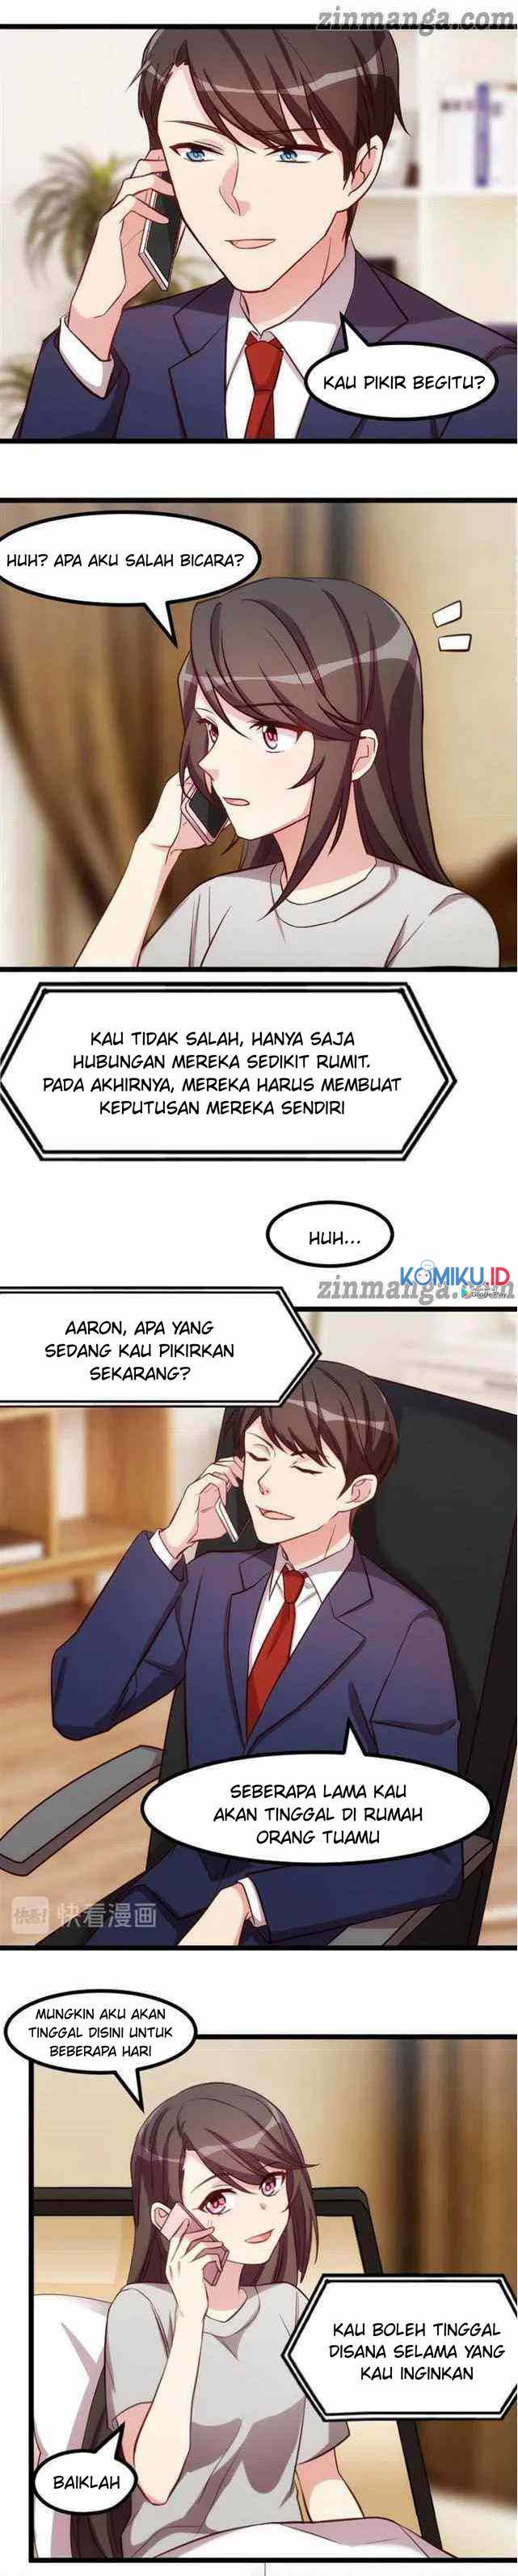 CEO’s Sudden Proposal Chapter 218 6